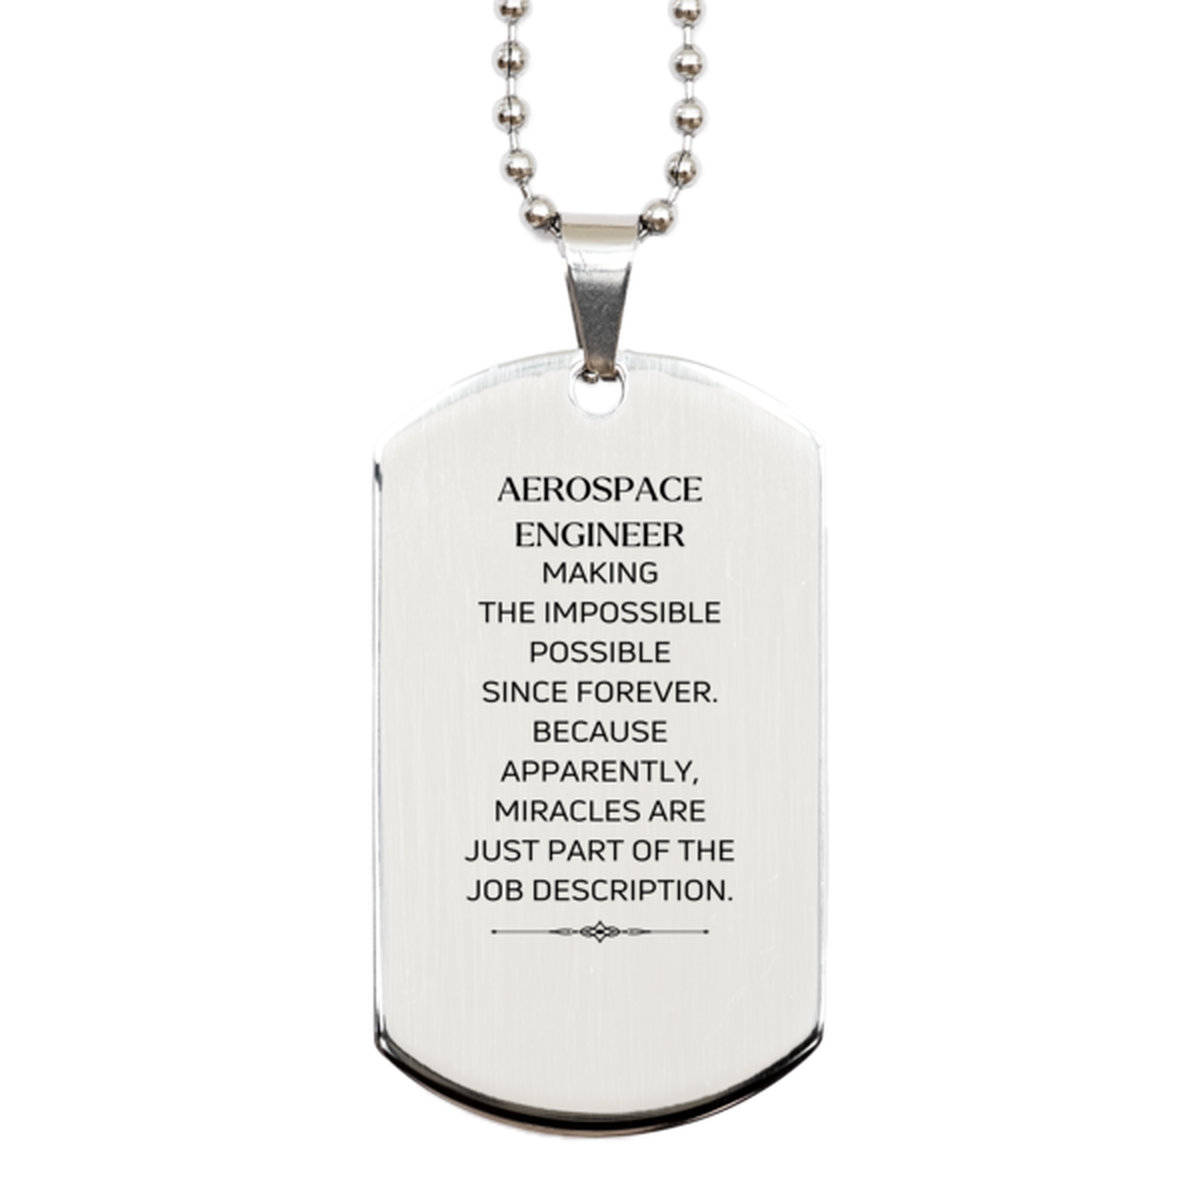 Funny Aerospace Engineer Gifts, Miracles are just part of the job description, Inspirational Birthday Silver Dog Tag For Aerospace Engineer, Men, Women, Coworkers, Friends, Boss